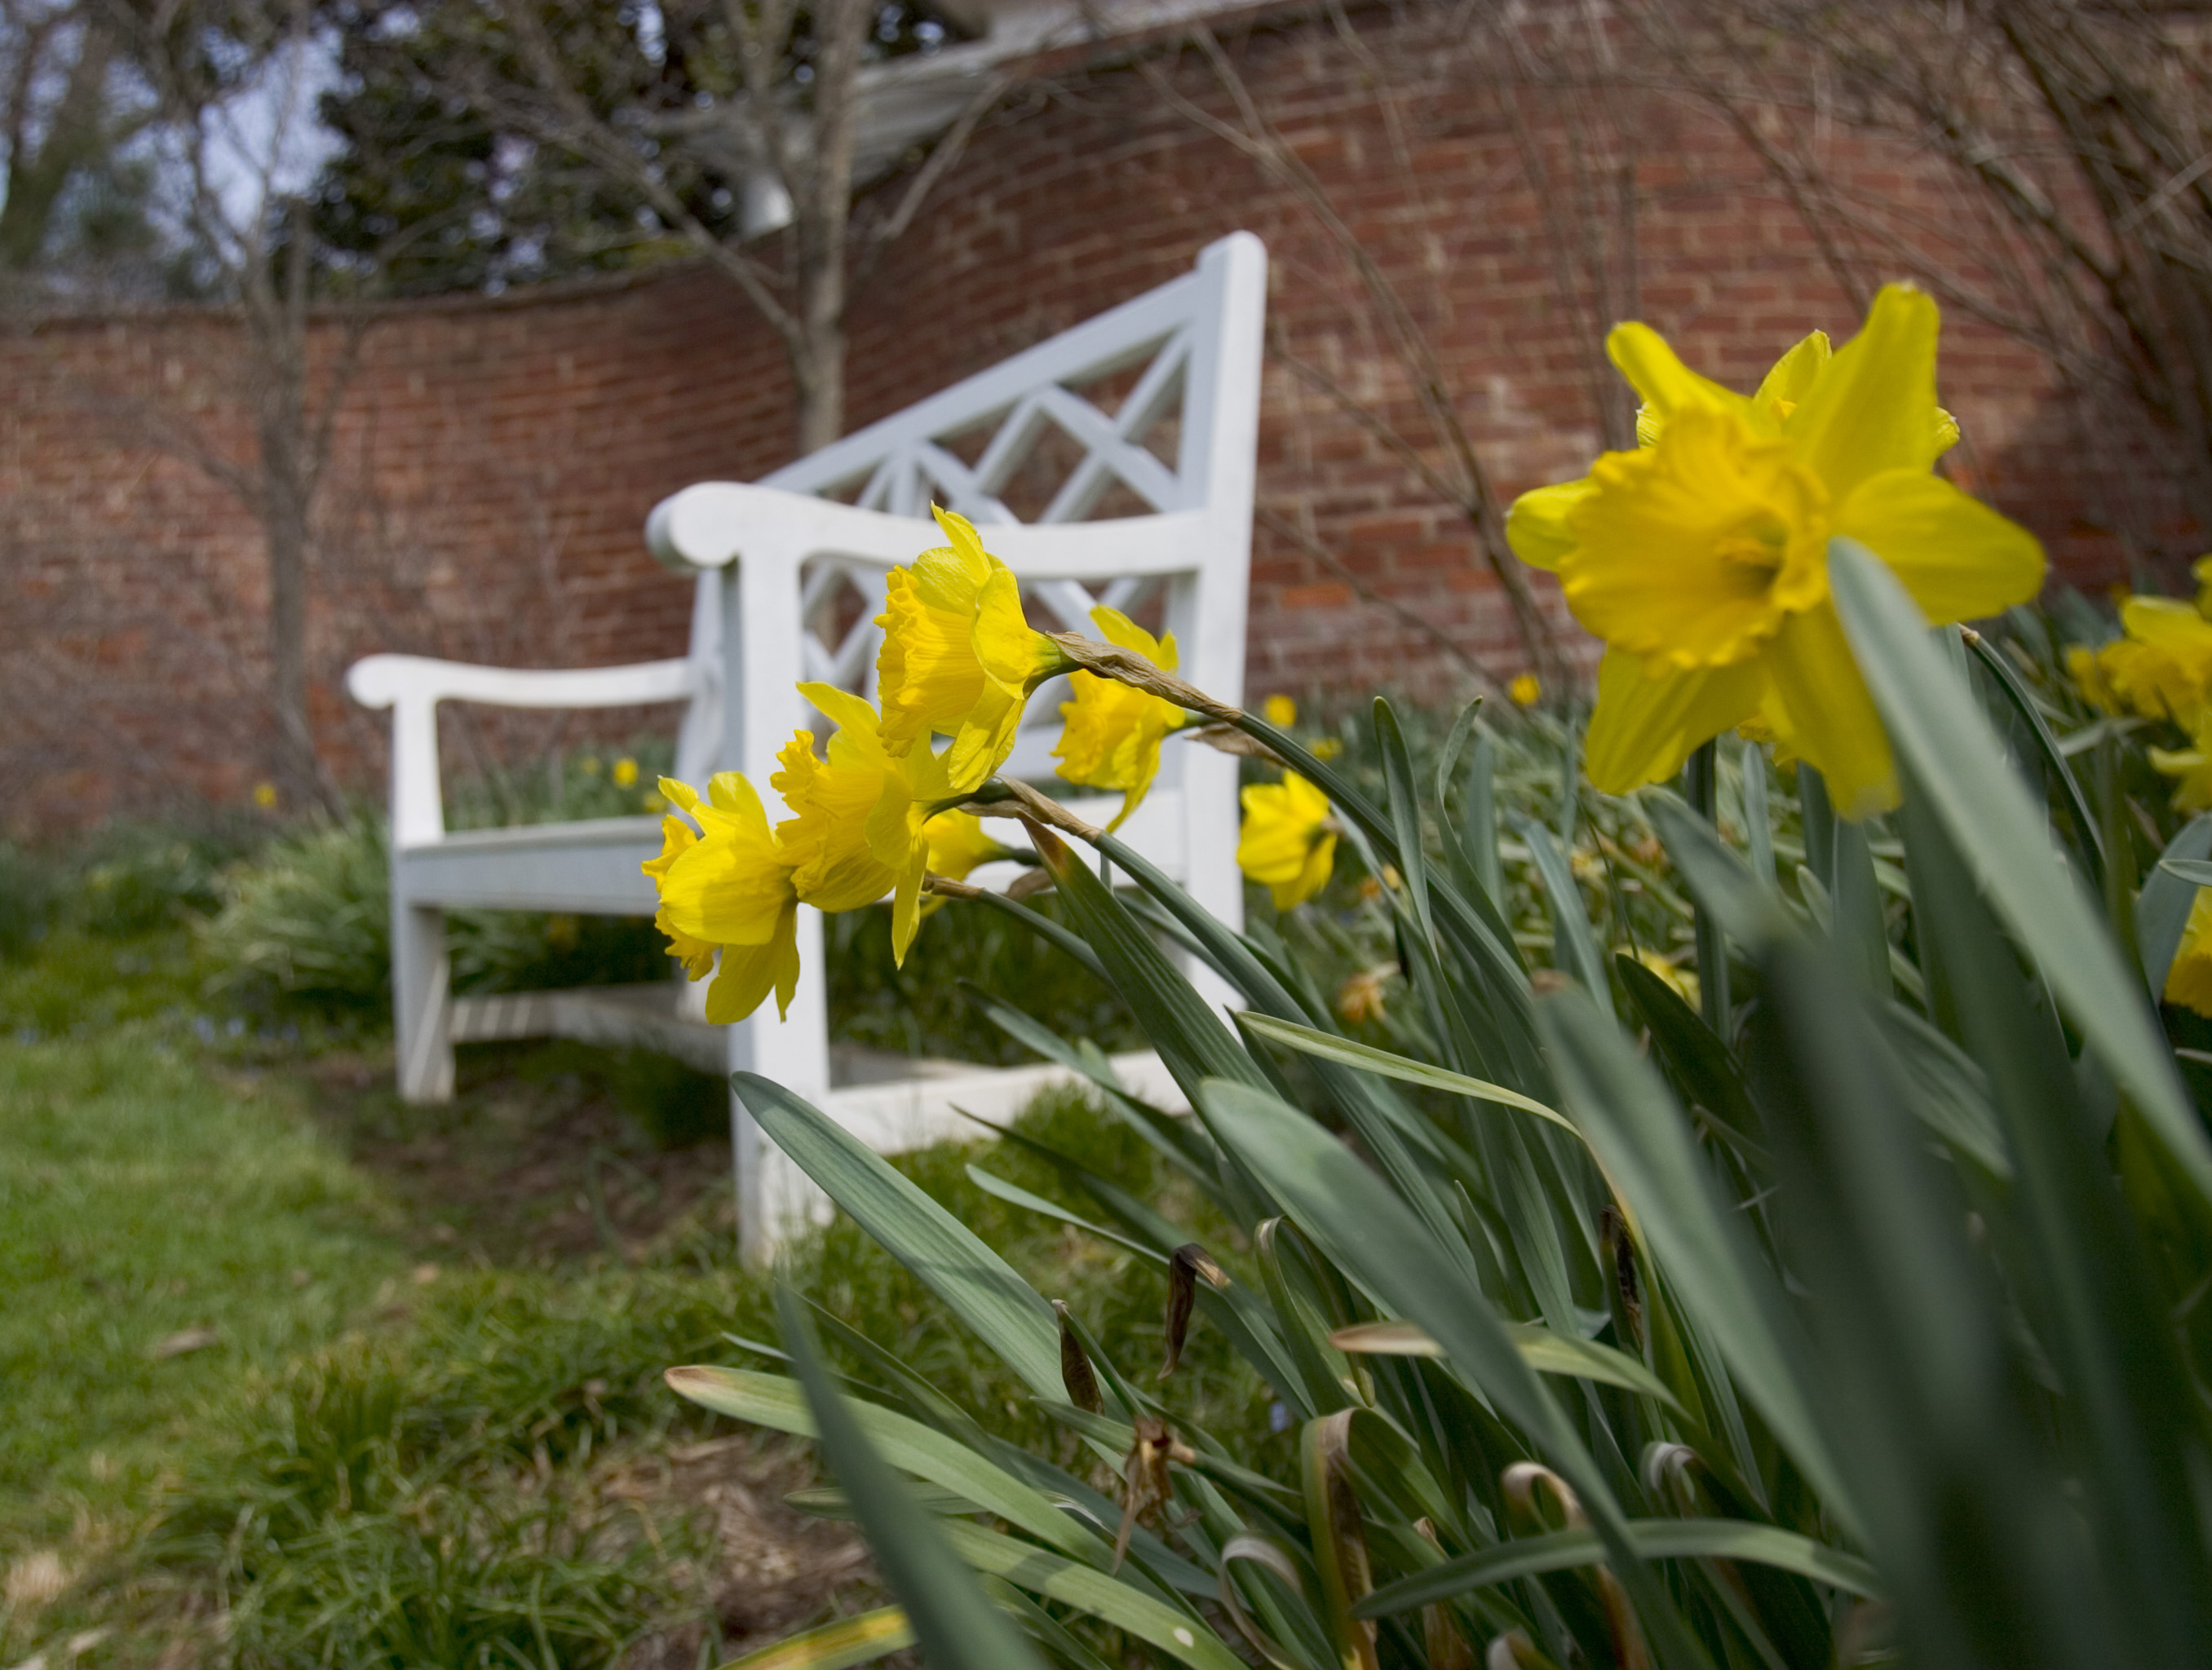 Yellow blooming flowers next to a white bench and red serpentine wall